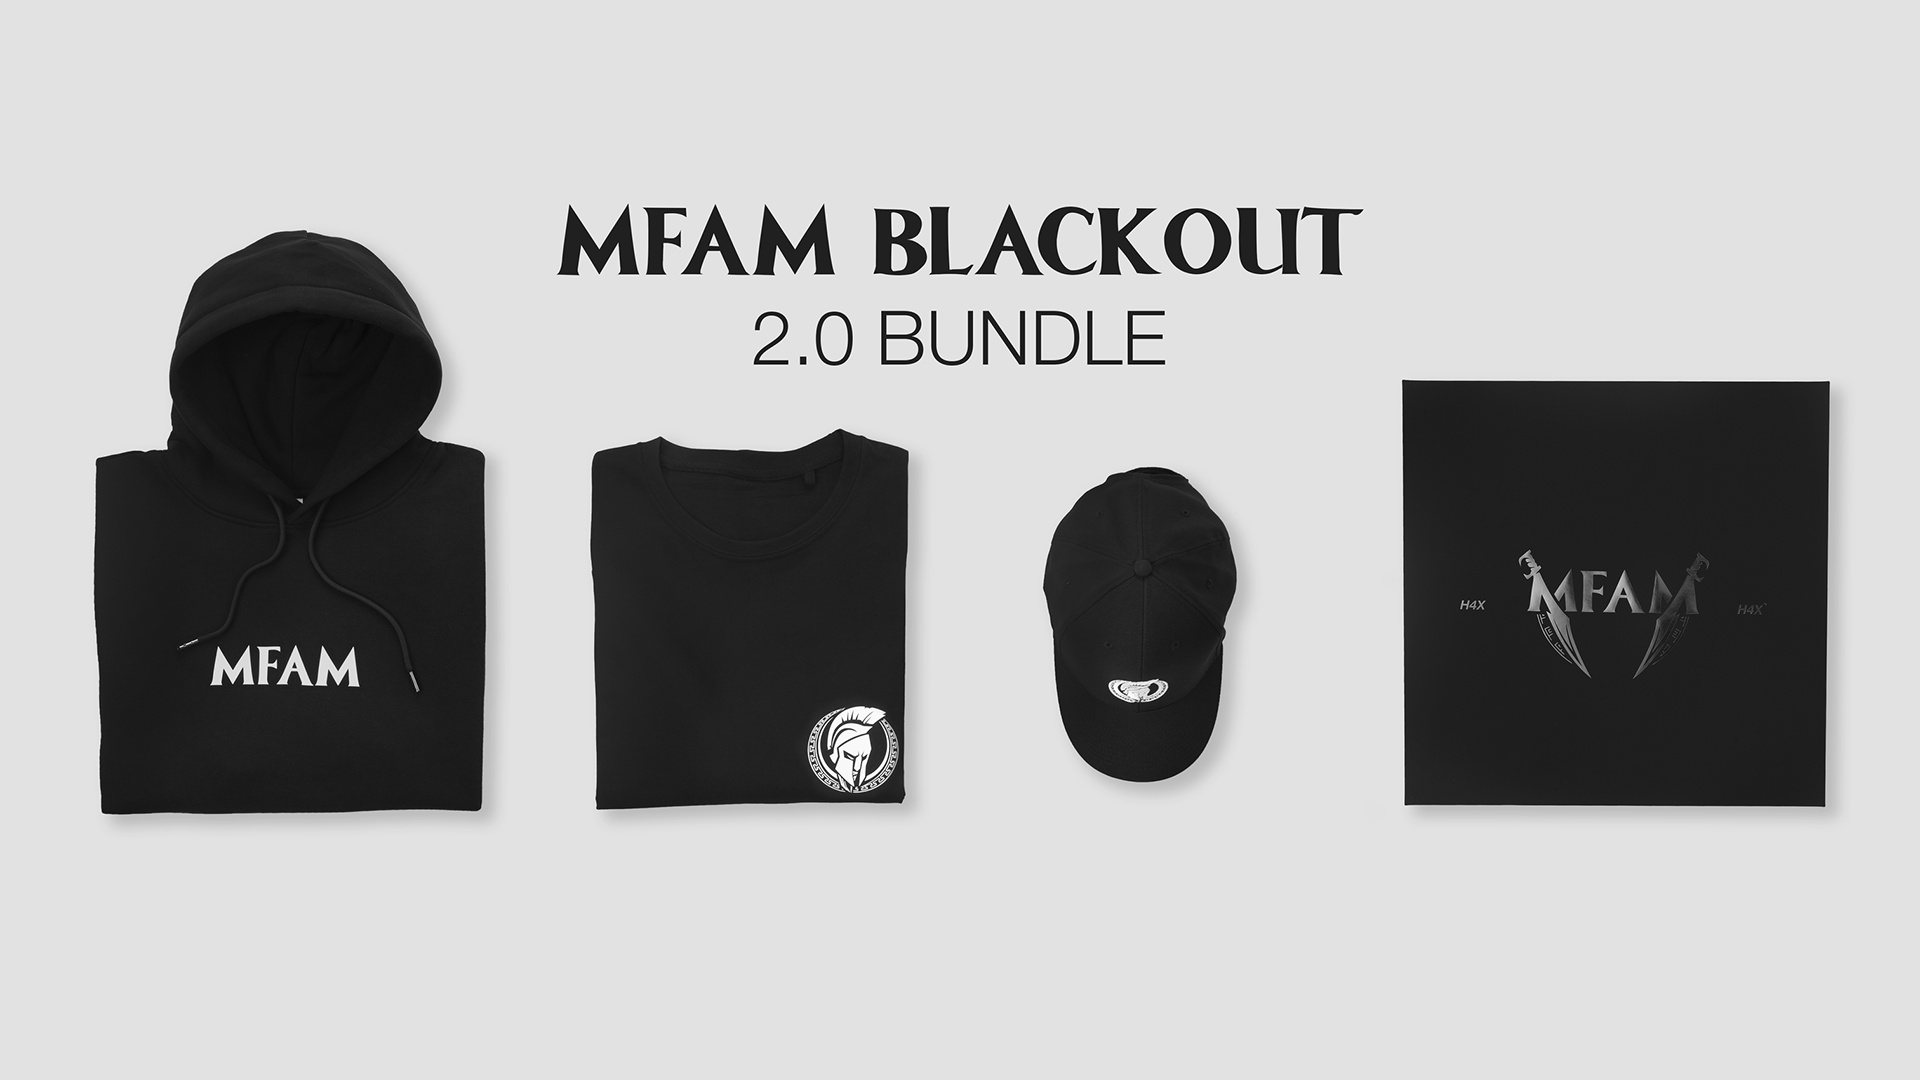 H4X PARTNERS WITH NICKMERCS "MFAM" FOR BLACKOUT 2.0 COLLECTION